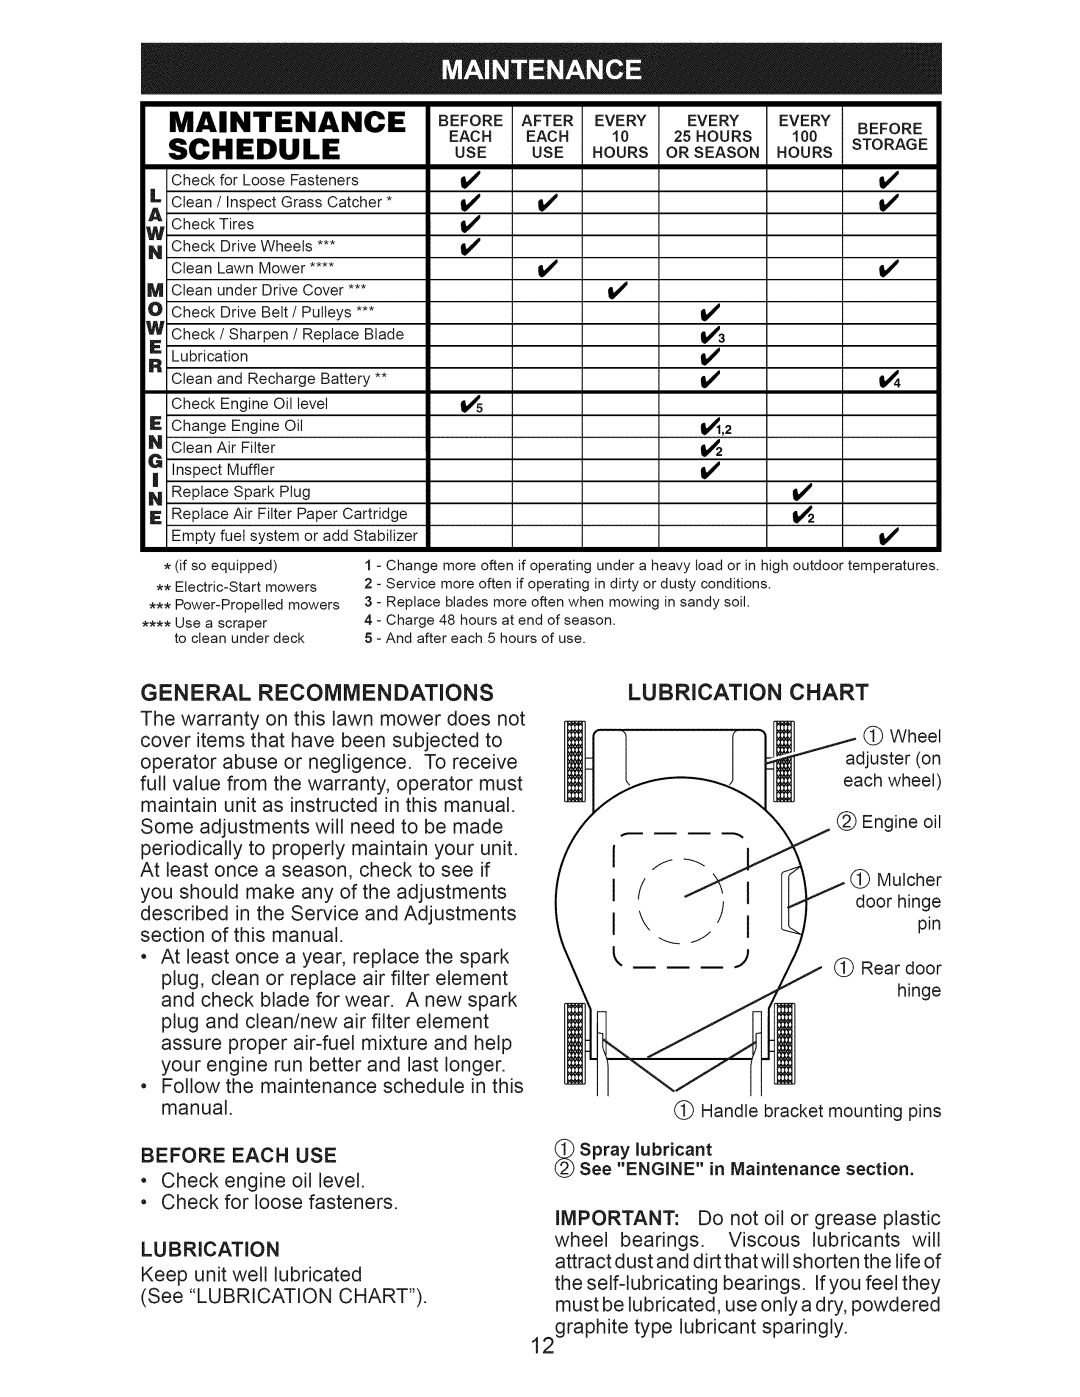 Craftsman 917.374540 owner manual Maintenance, Schedule, Use Hours 